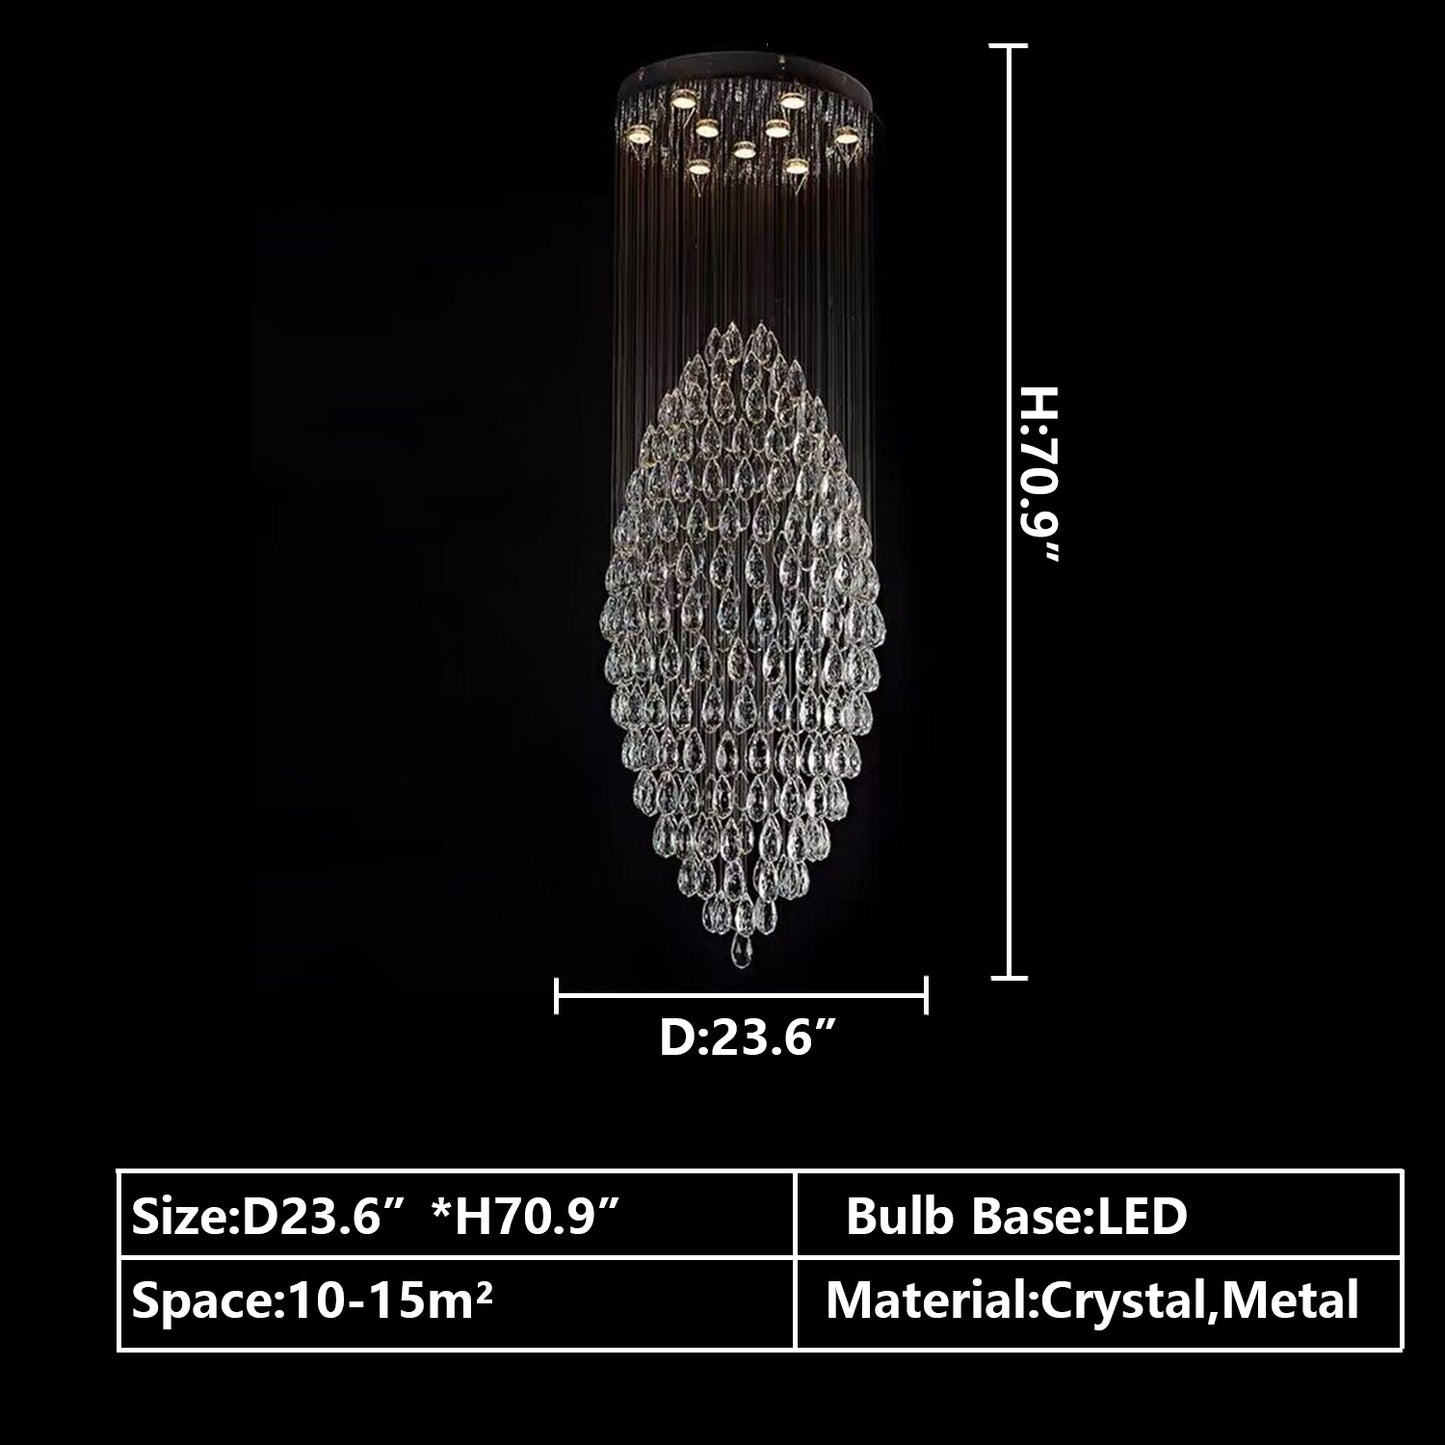 D23.6"*H70.9" chandelier,chandeliers,crystal,pendant,metal,oval,extra large,large,huge,big,oversized,long,raindrop,teardrop,flush mount,ceiling,living room,dining room,foyer,stairs,spiral staircase,entrys,hallway,hotel lobby,duplex hall,loft